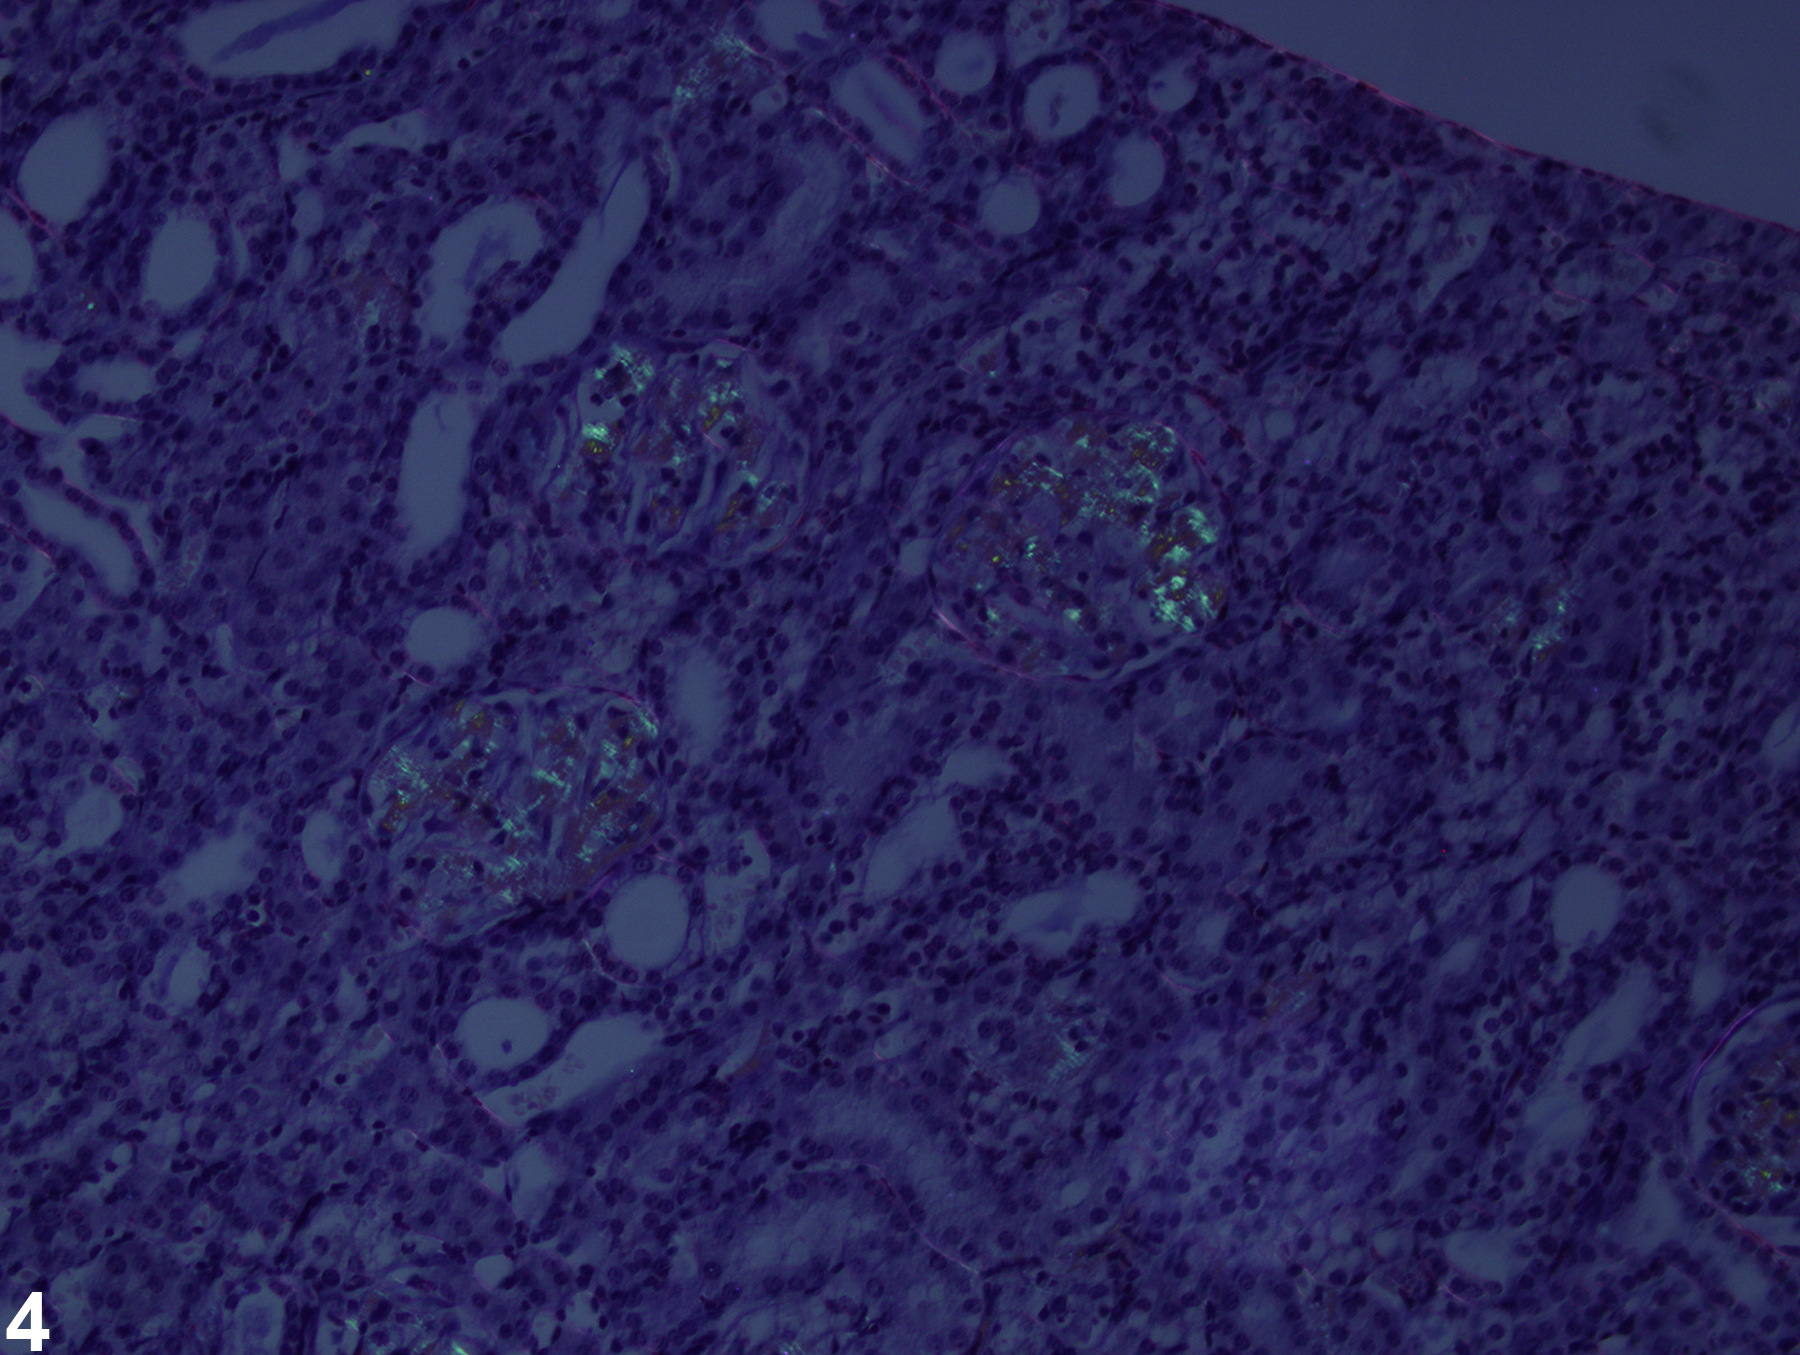 Image of amyloid in the kidney from a  B6C3F1 mouse in a chronic study